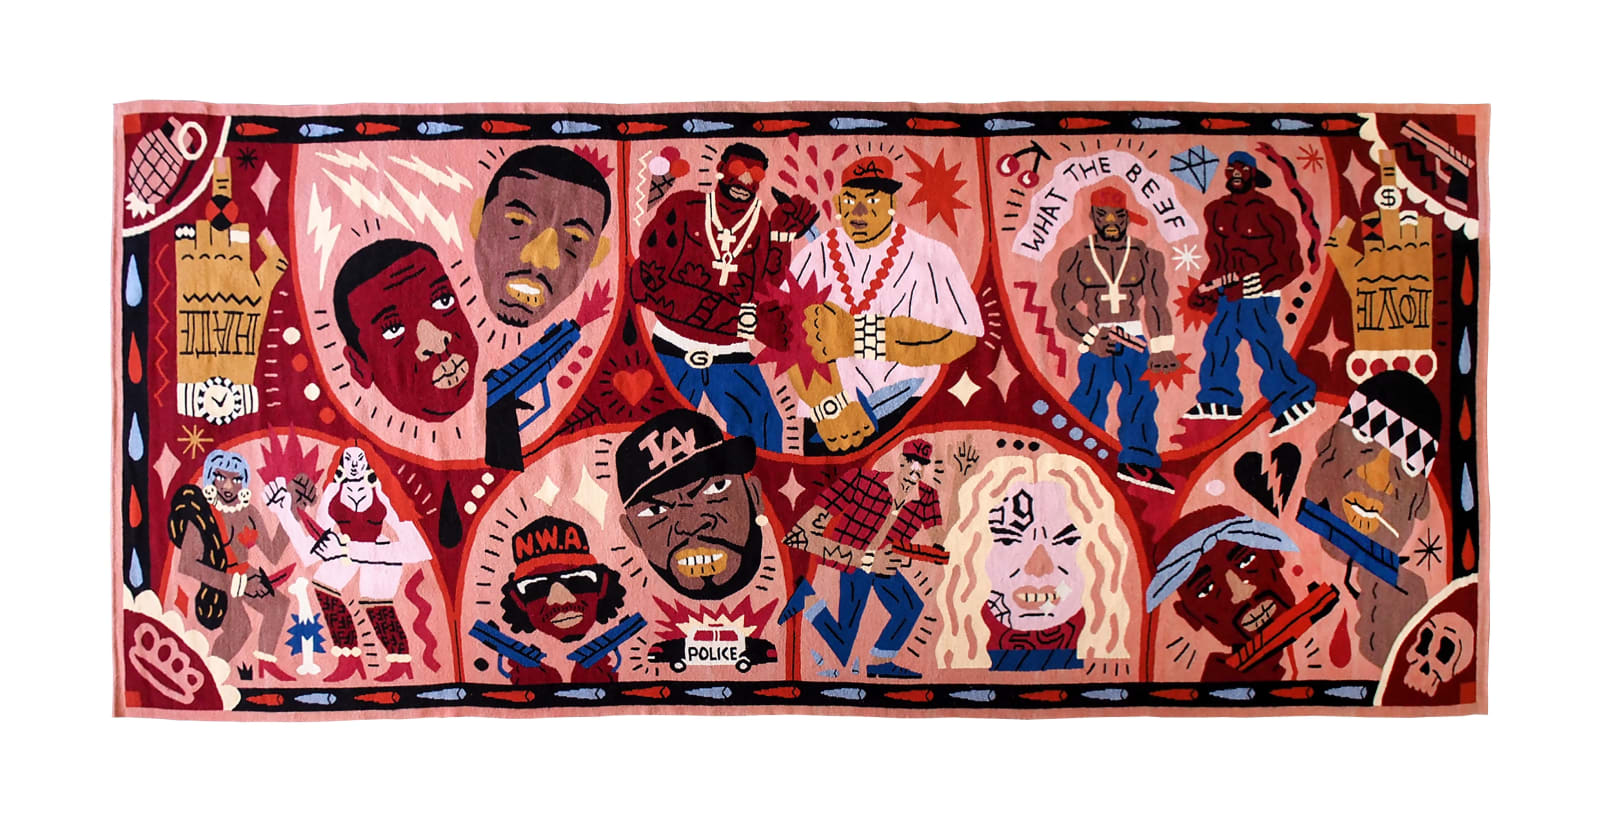 What the Beef, 2019-2020, tapestry, 170 x 380 cm